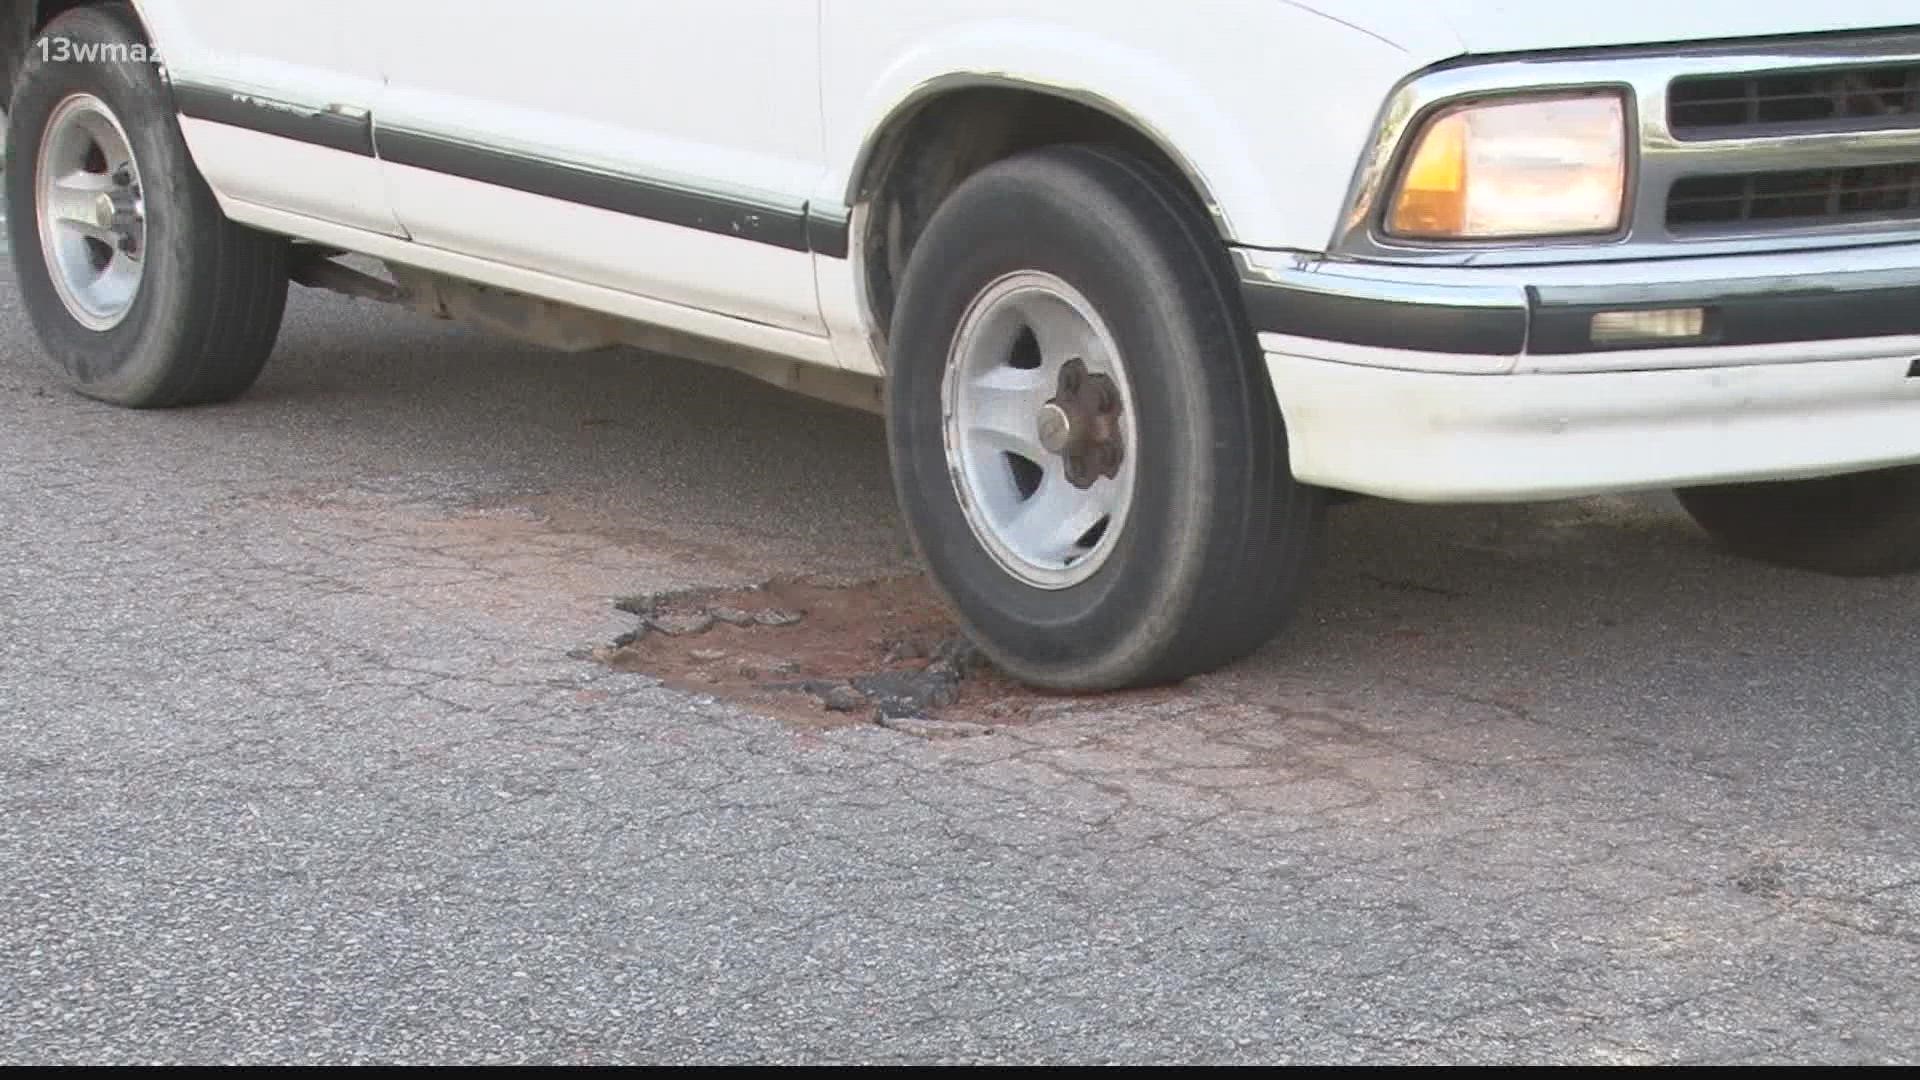 Debbie Shanks says Peach County fills in the potholes, but with folks driving over the patches, the problem is back in a couple of weeks